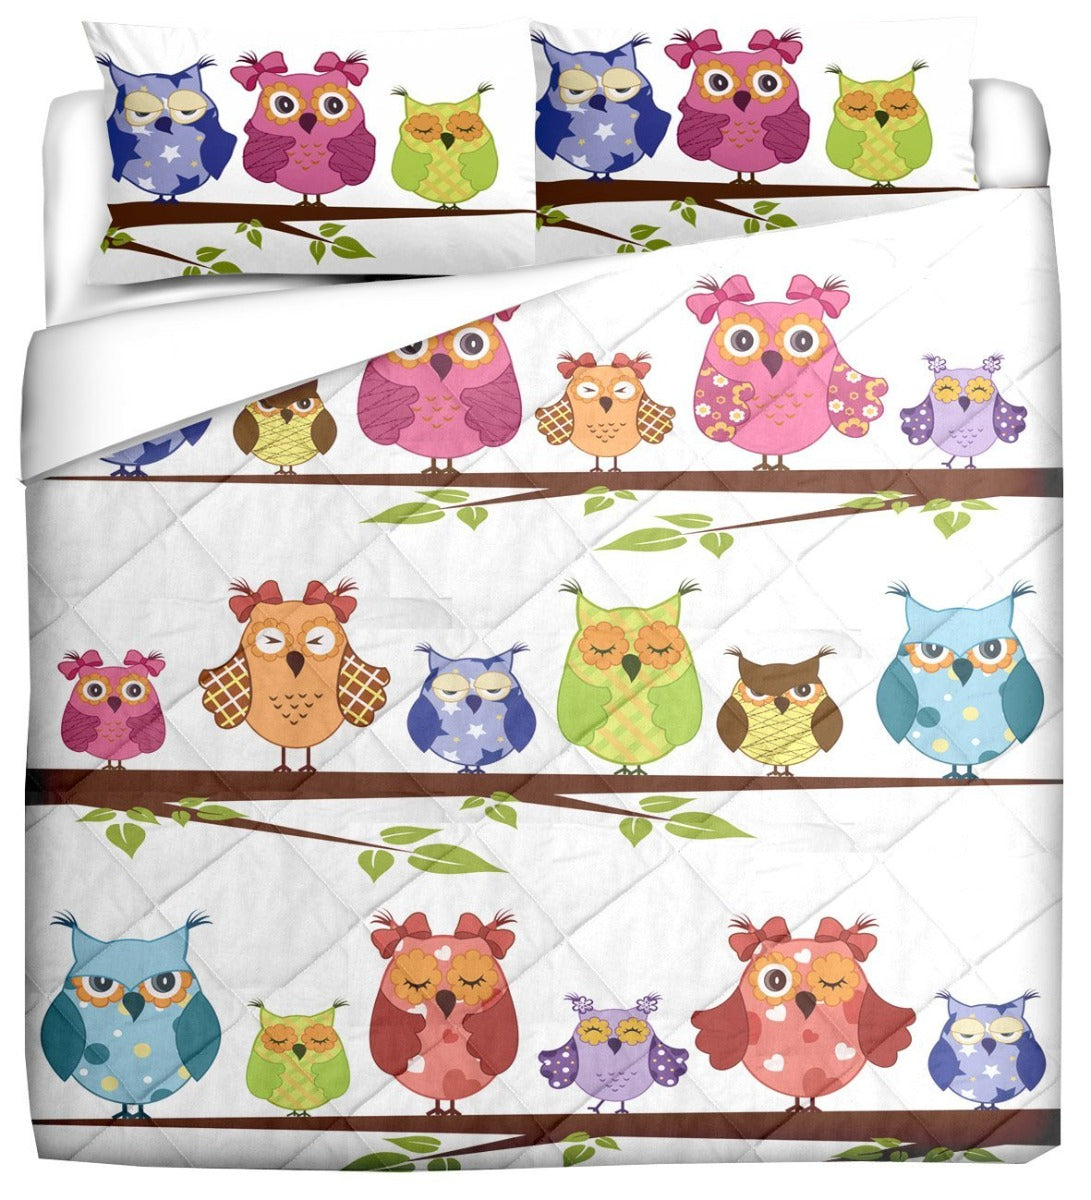 Winter Quilt - Owls in a row